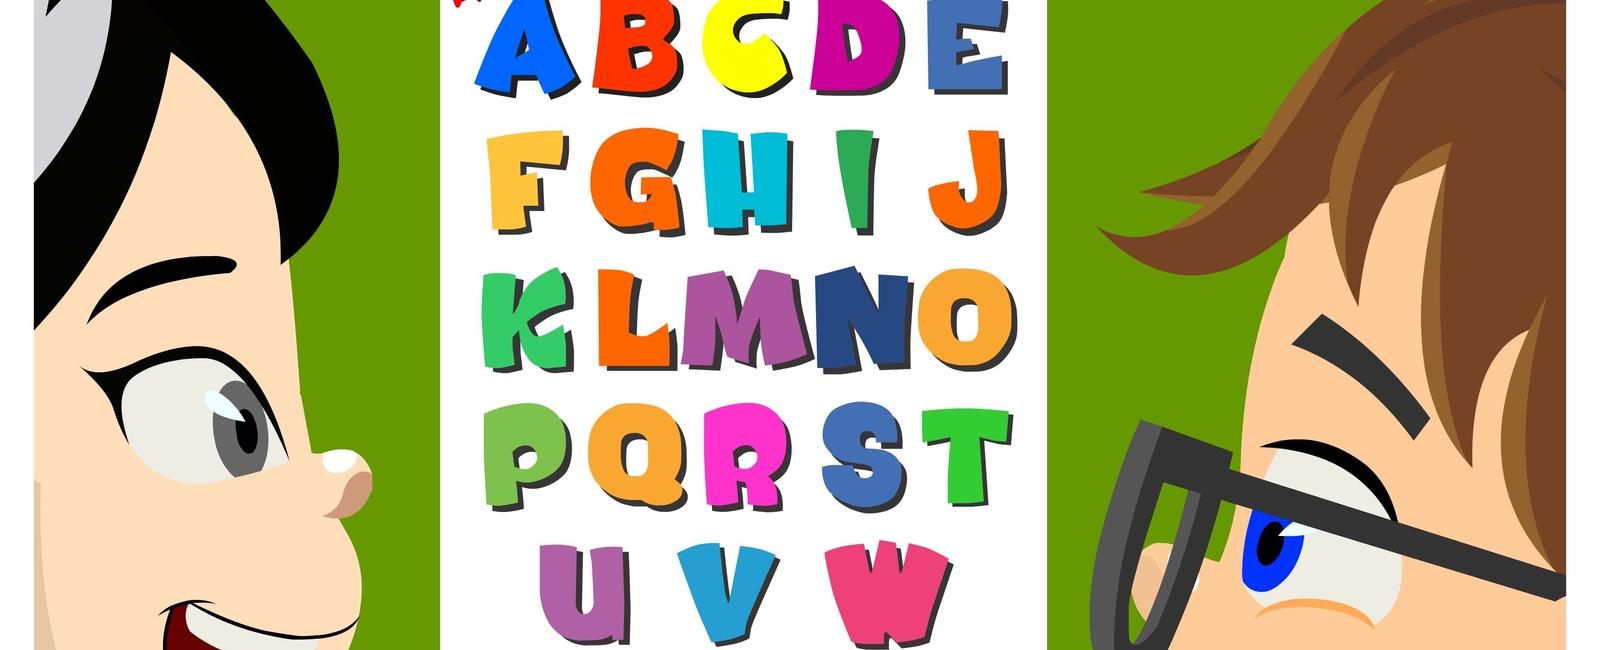 The most commonly used letter in the alphabet is e